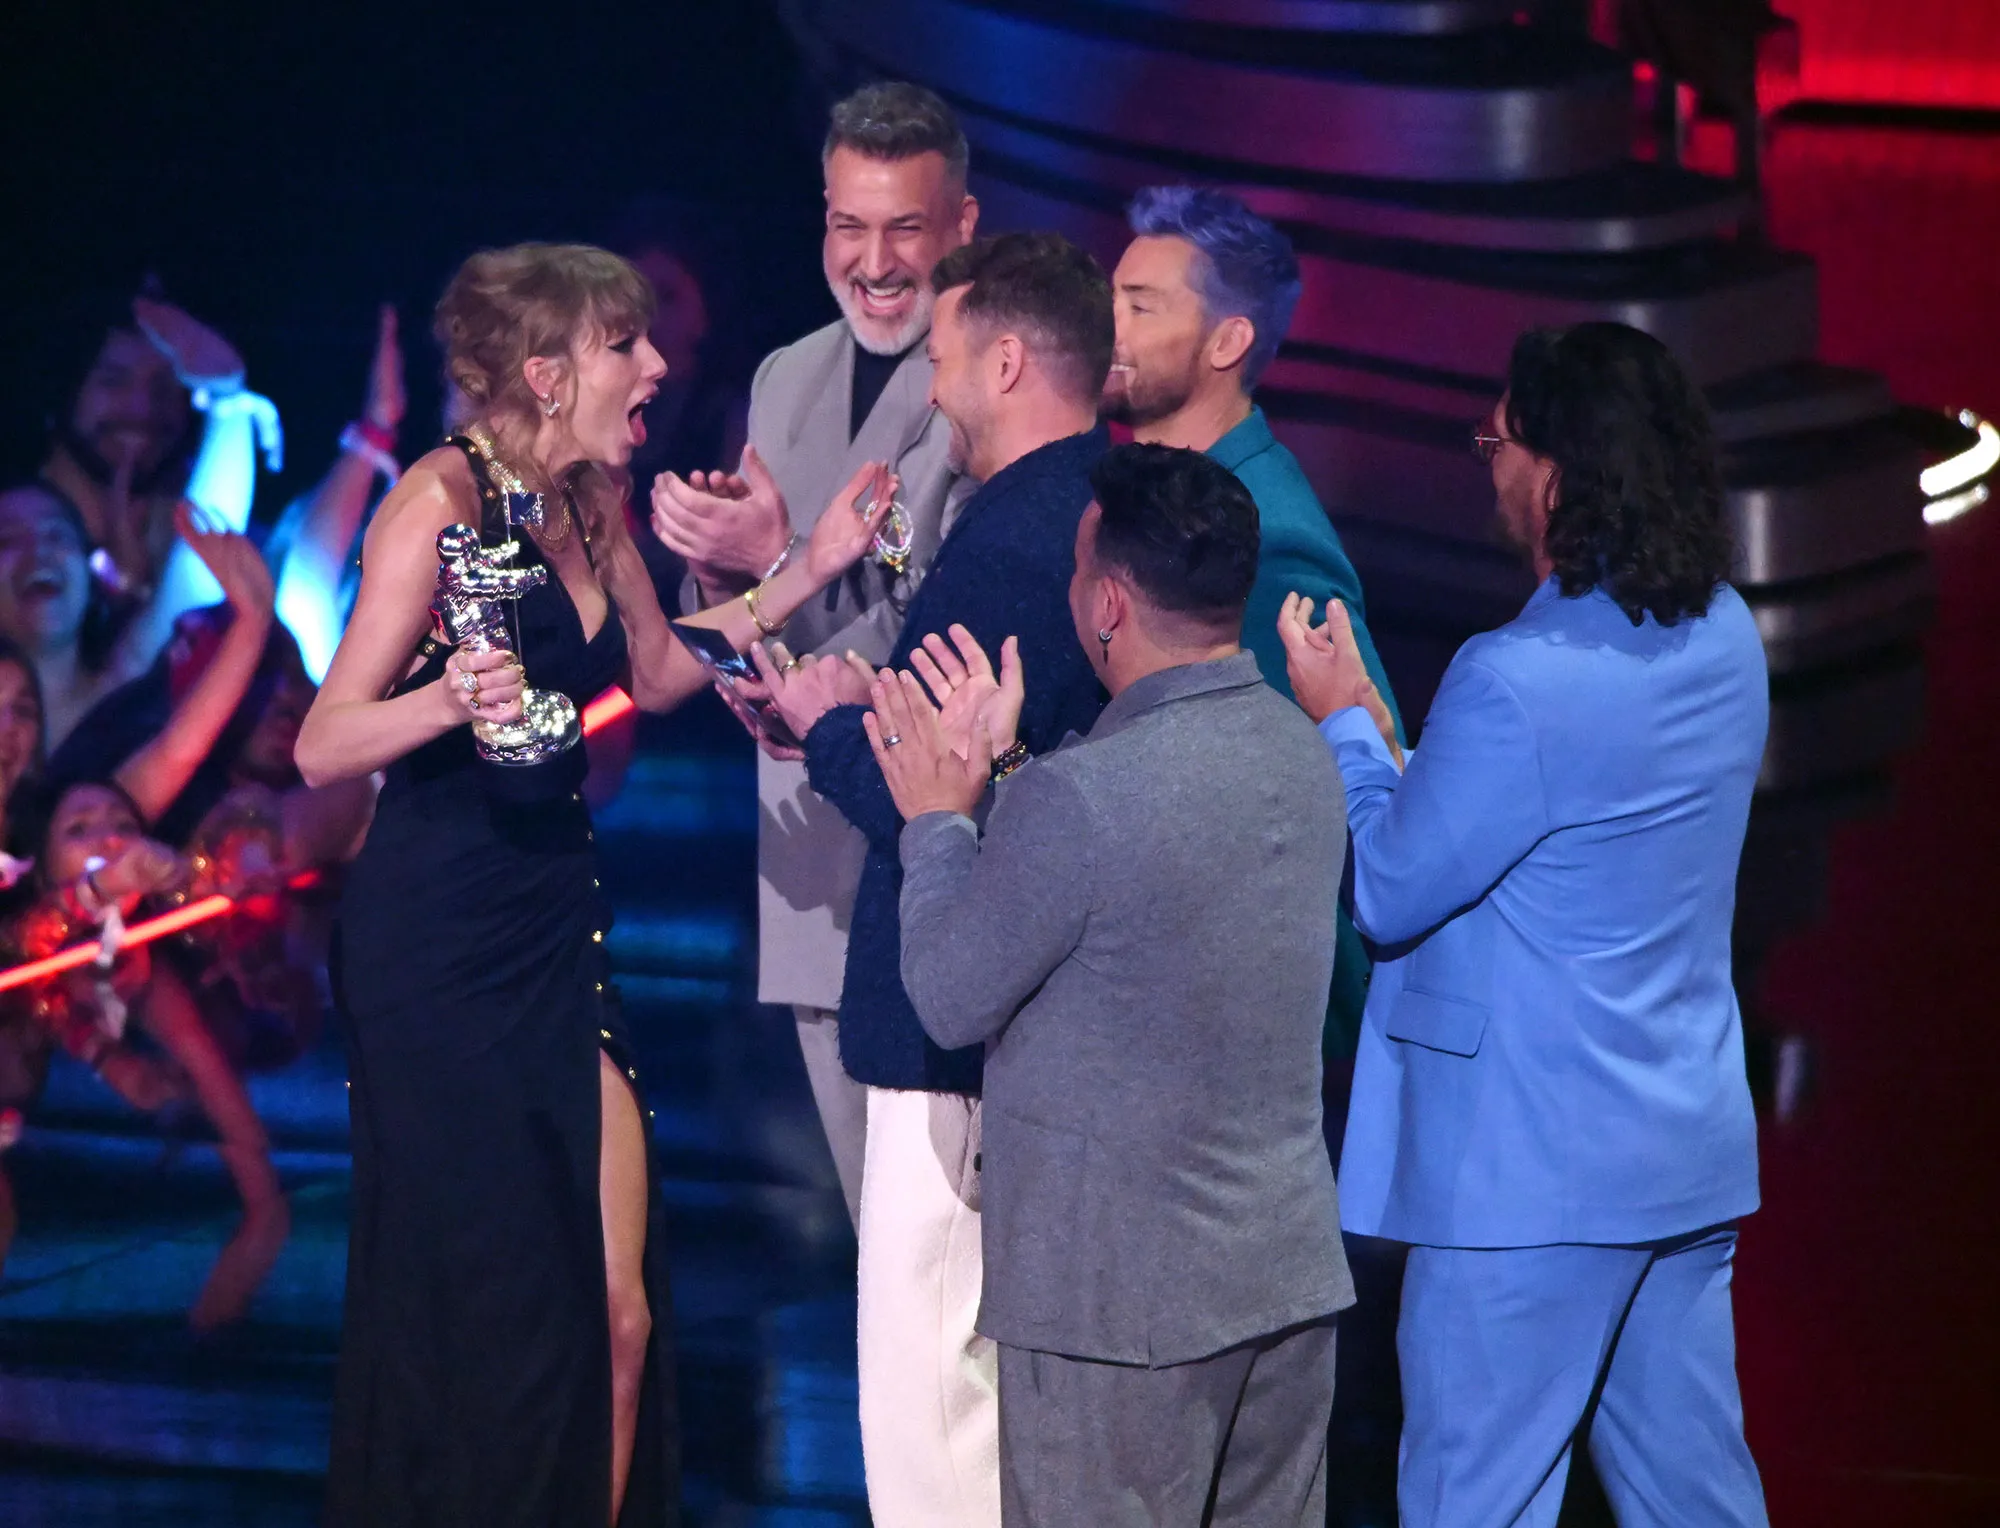 NSYNC Reunite to Present VMA to Taylor Swift, Who Asks: ‘Are You Guys Doing Something [New]? I Need to Know!’

